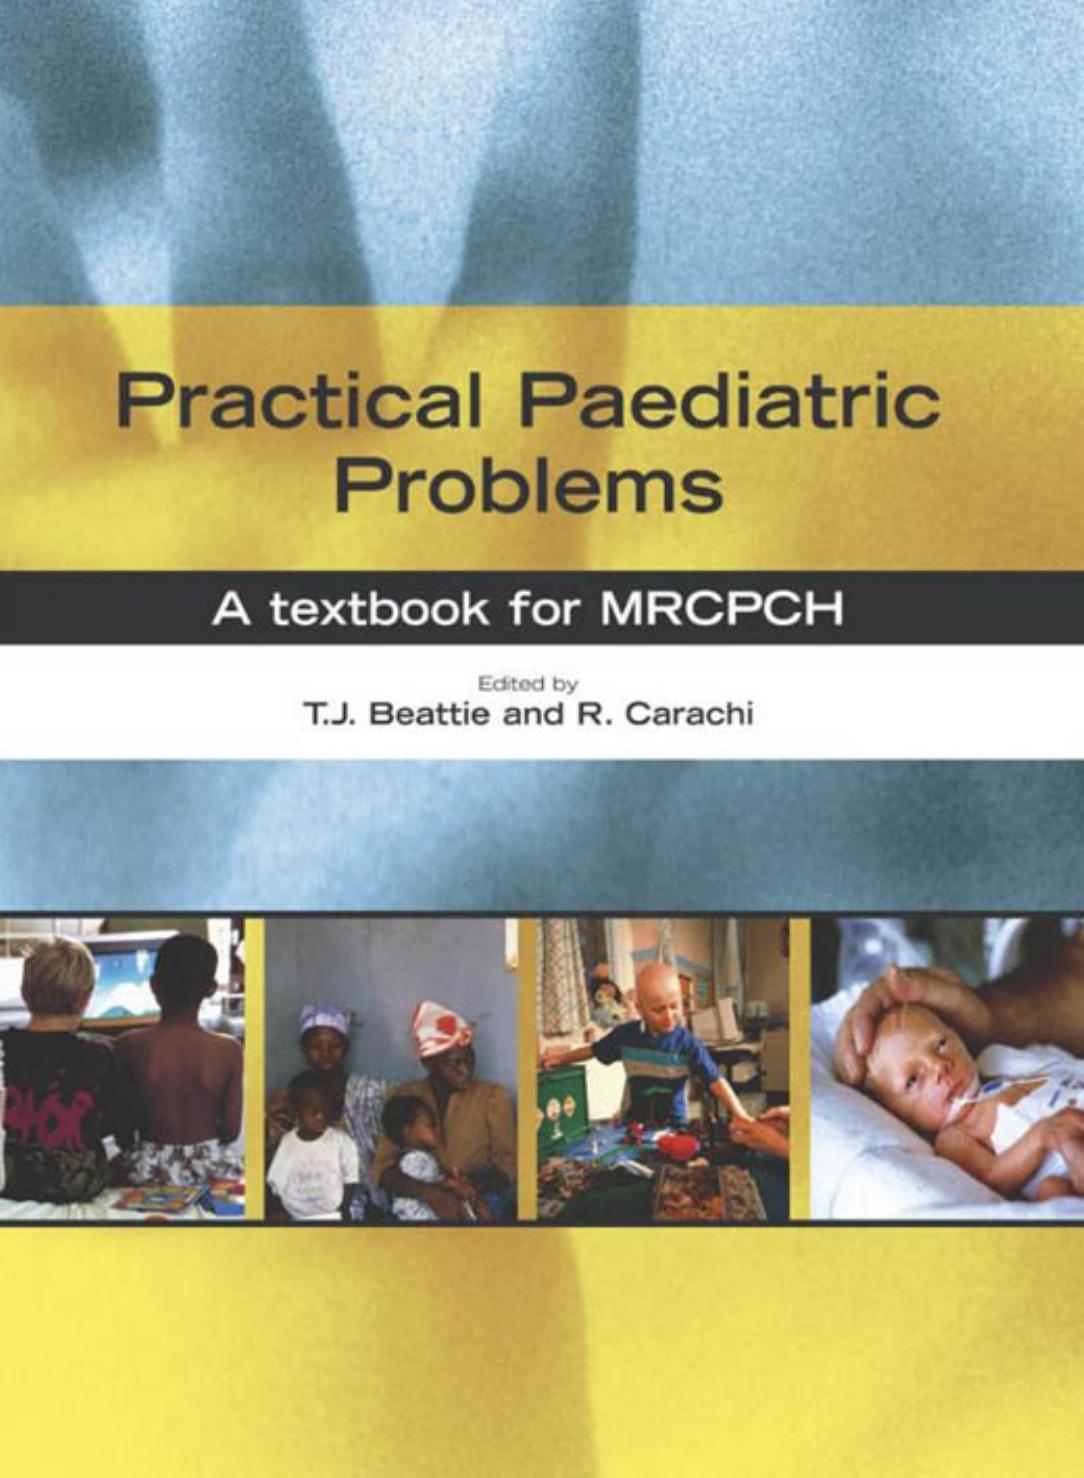 Practical Paediatric Problems  A Textbook for MRCPCH  2005